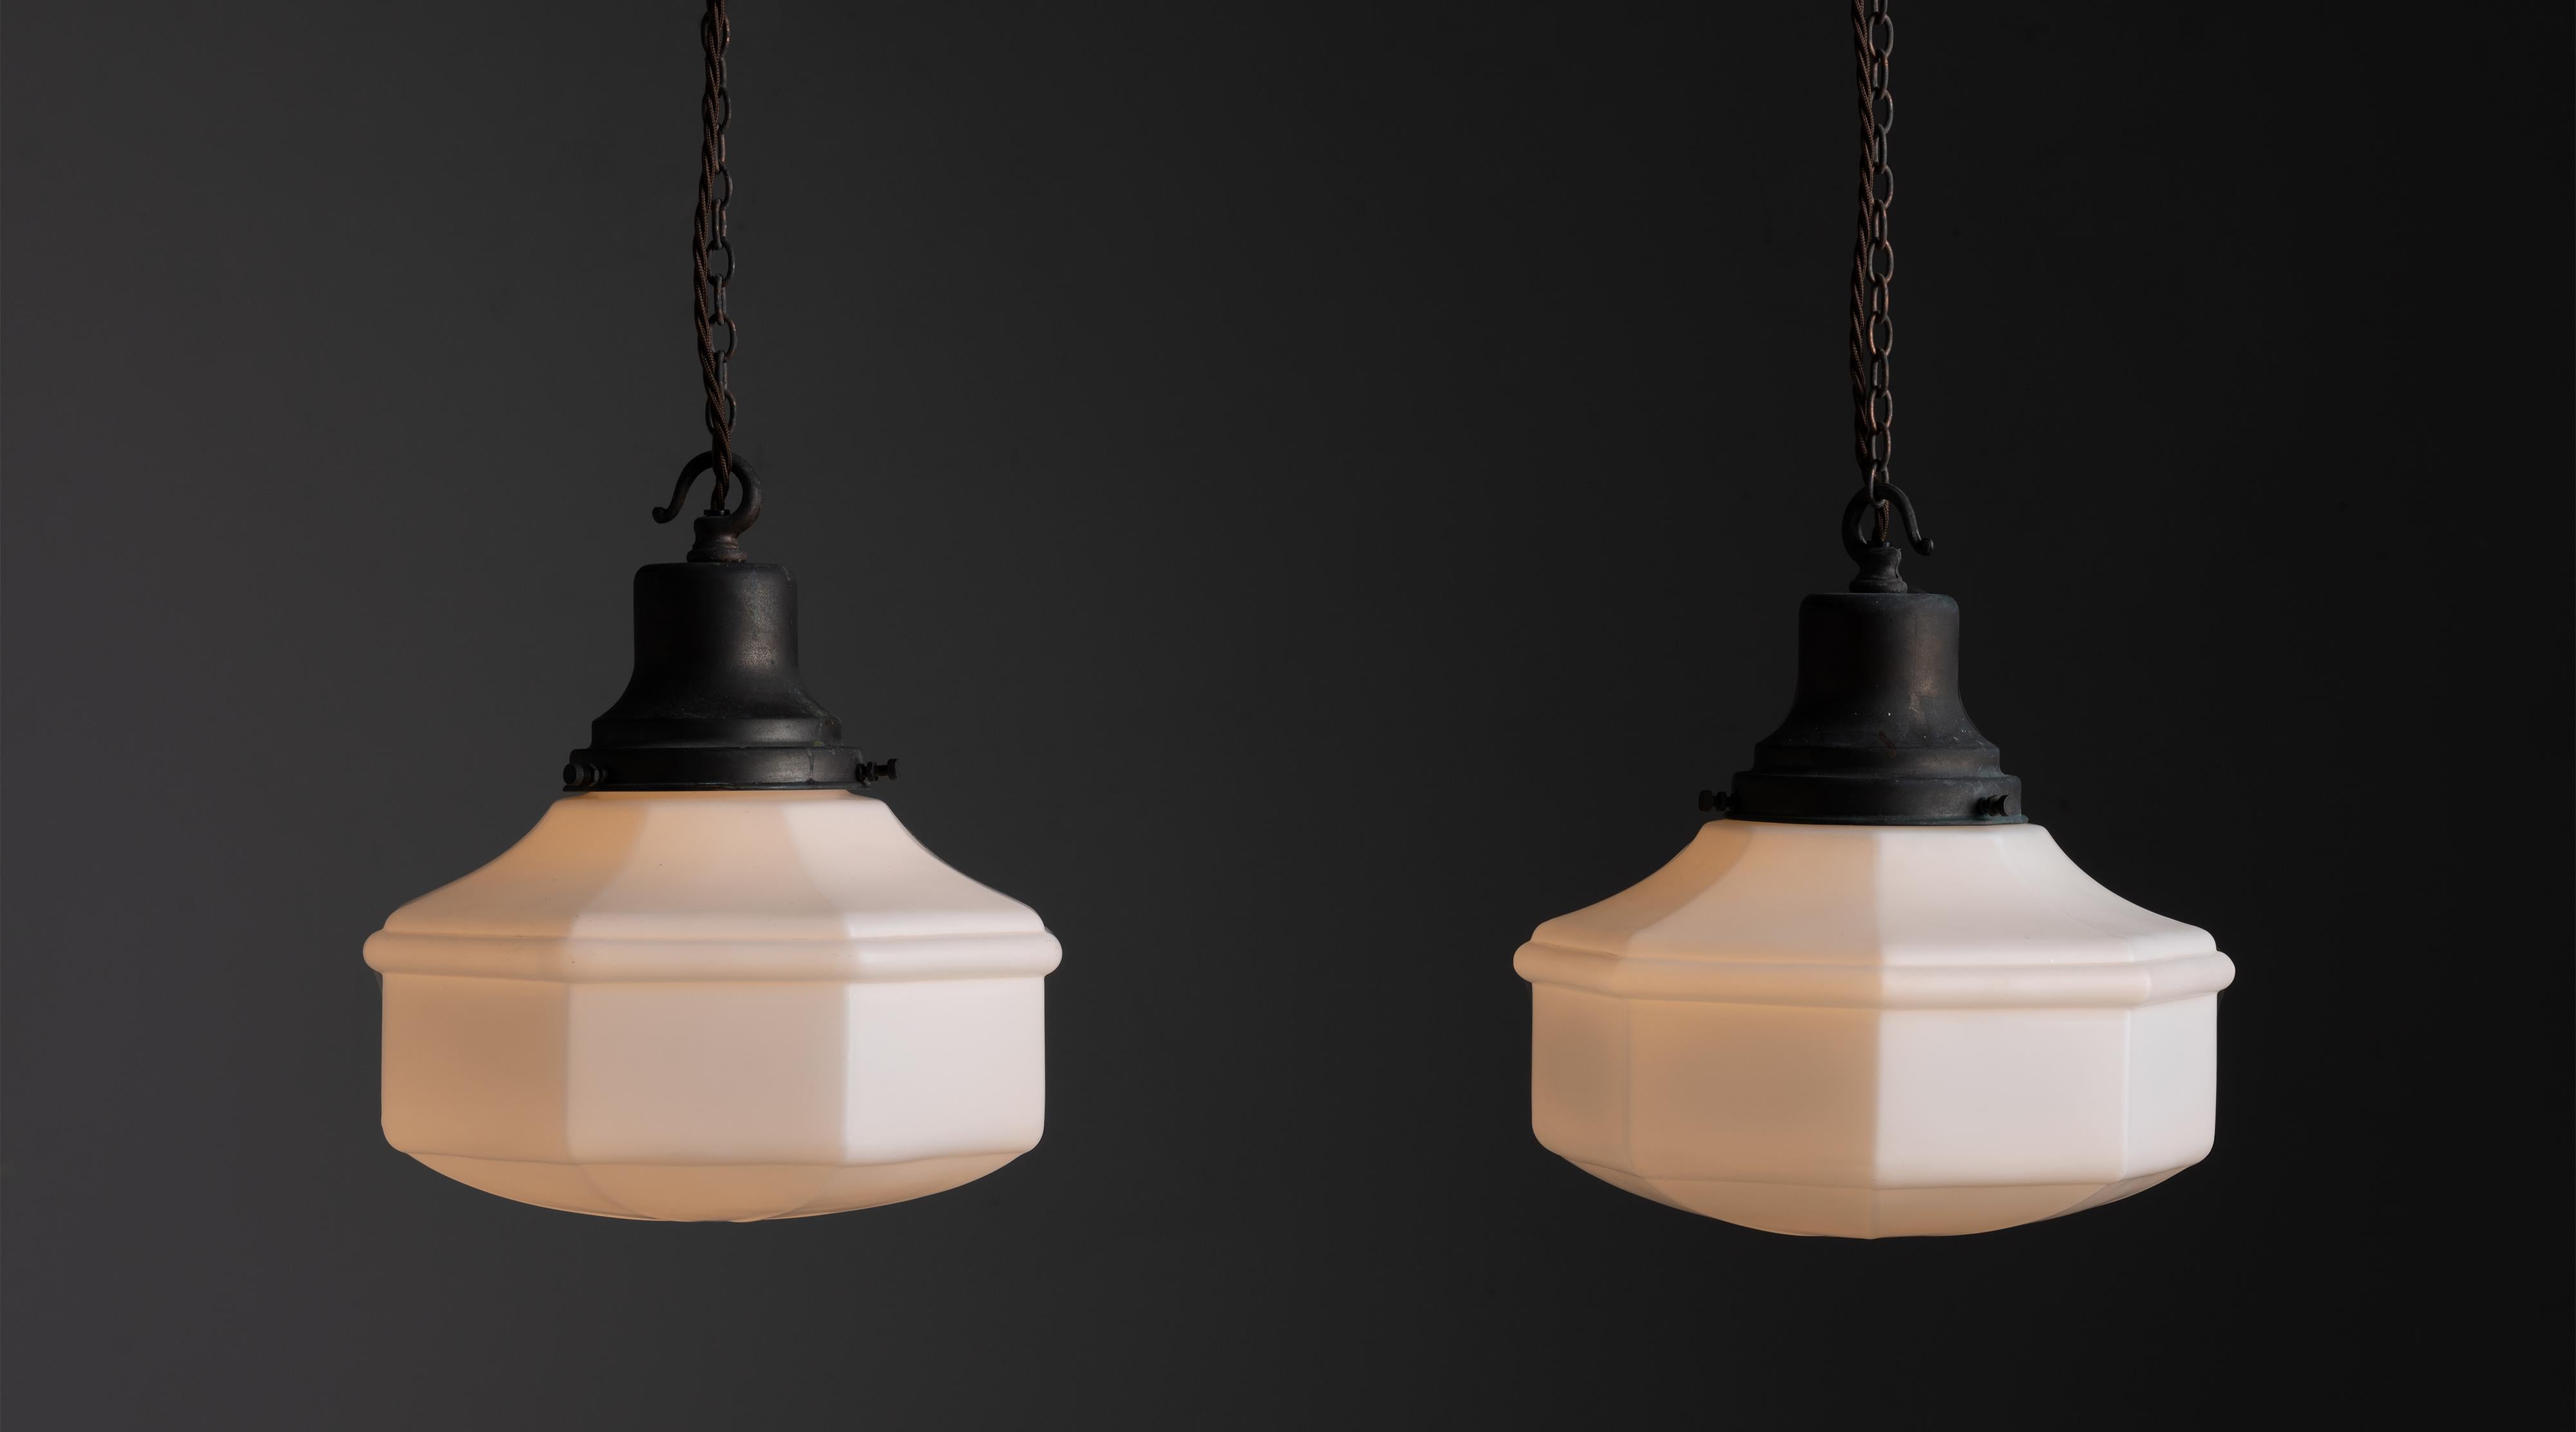 Small opaline milk glass pendants, England Circa 1900.

Victorian era chapel pendants with original ceiling chain and rose. 

 

*Please note the price is per unit, and the lights are sold individually*

